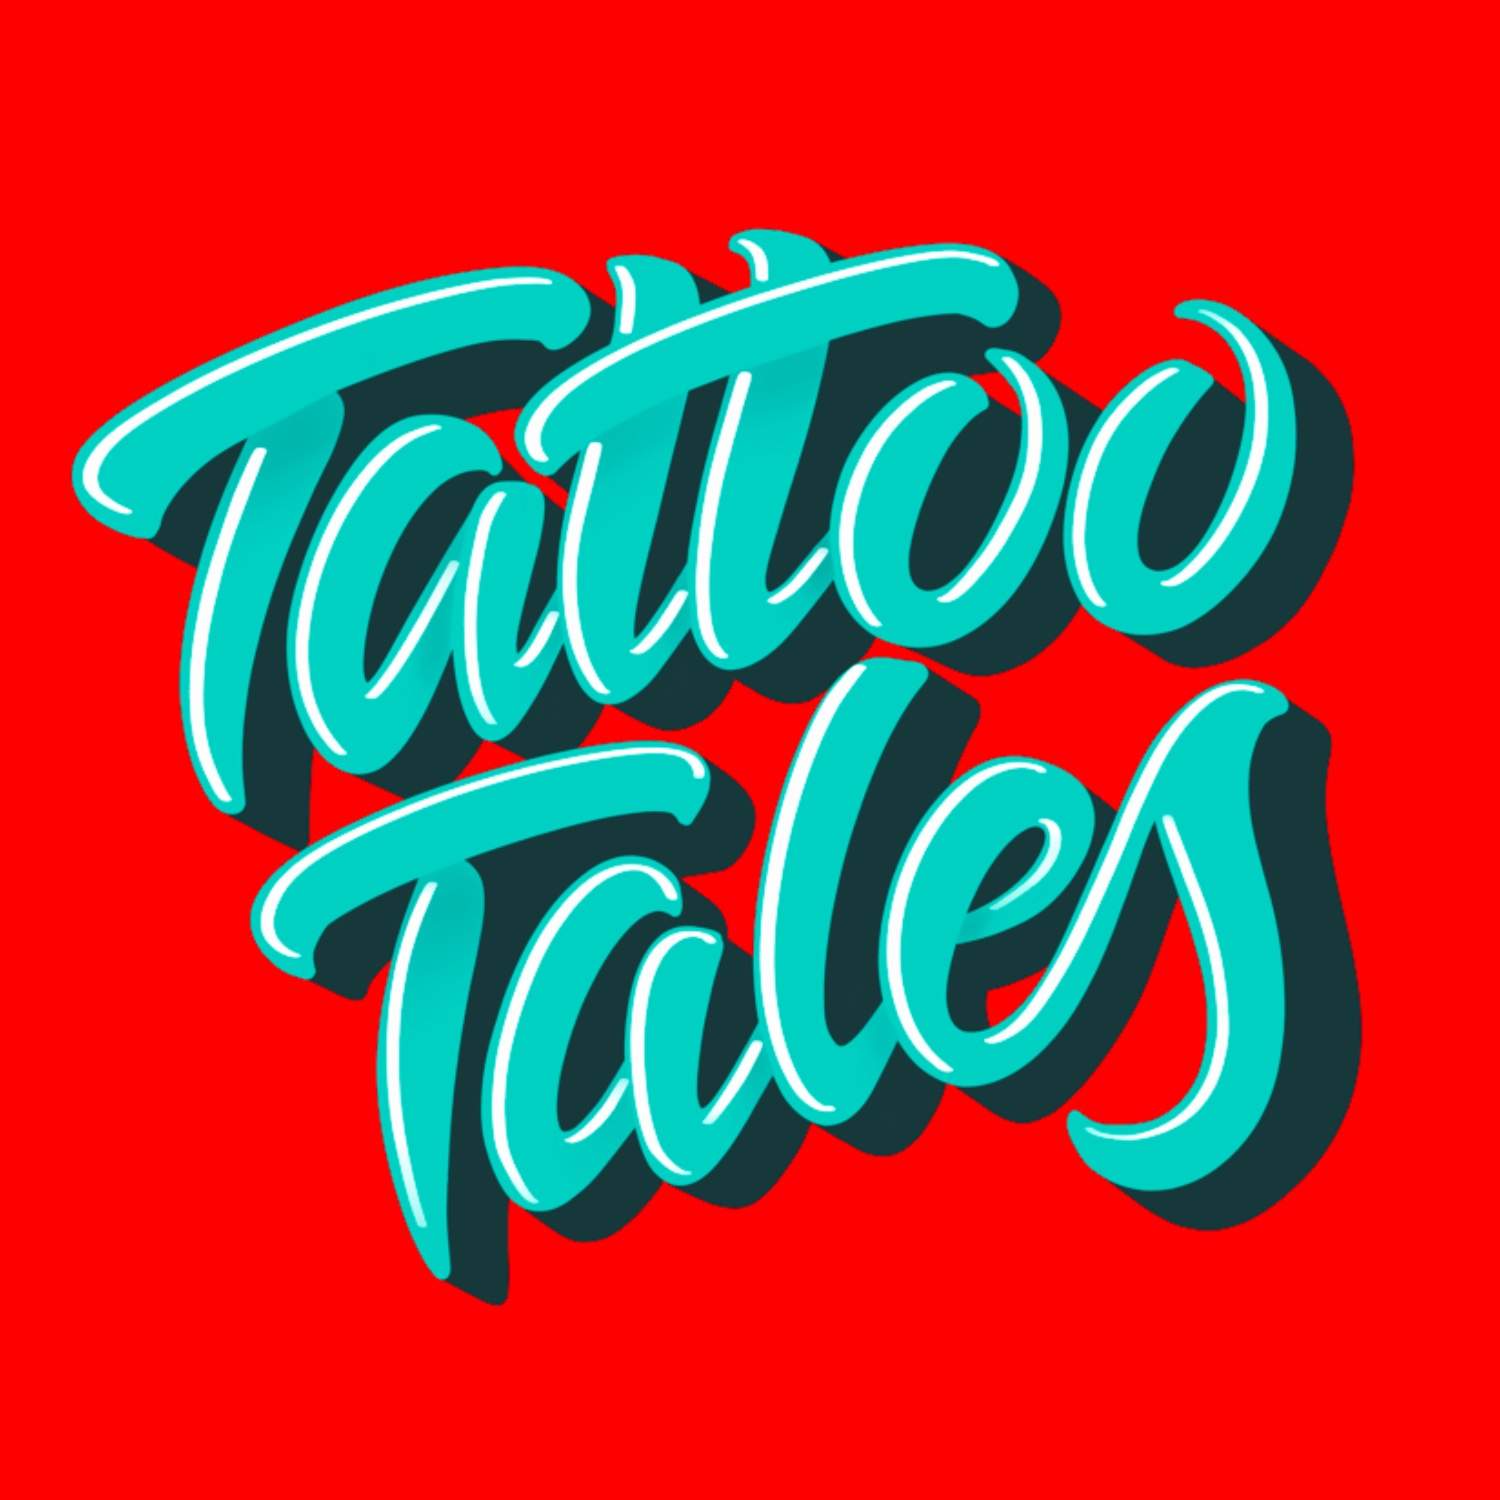 Interview with with Pascal Bagot by Stef Bastian for the Tattoo Tales podcast